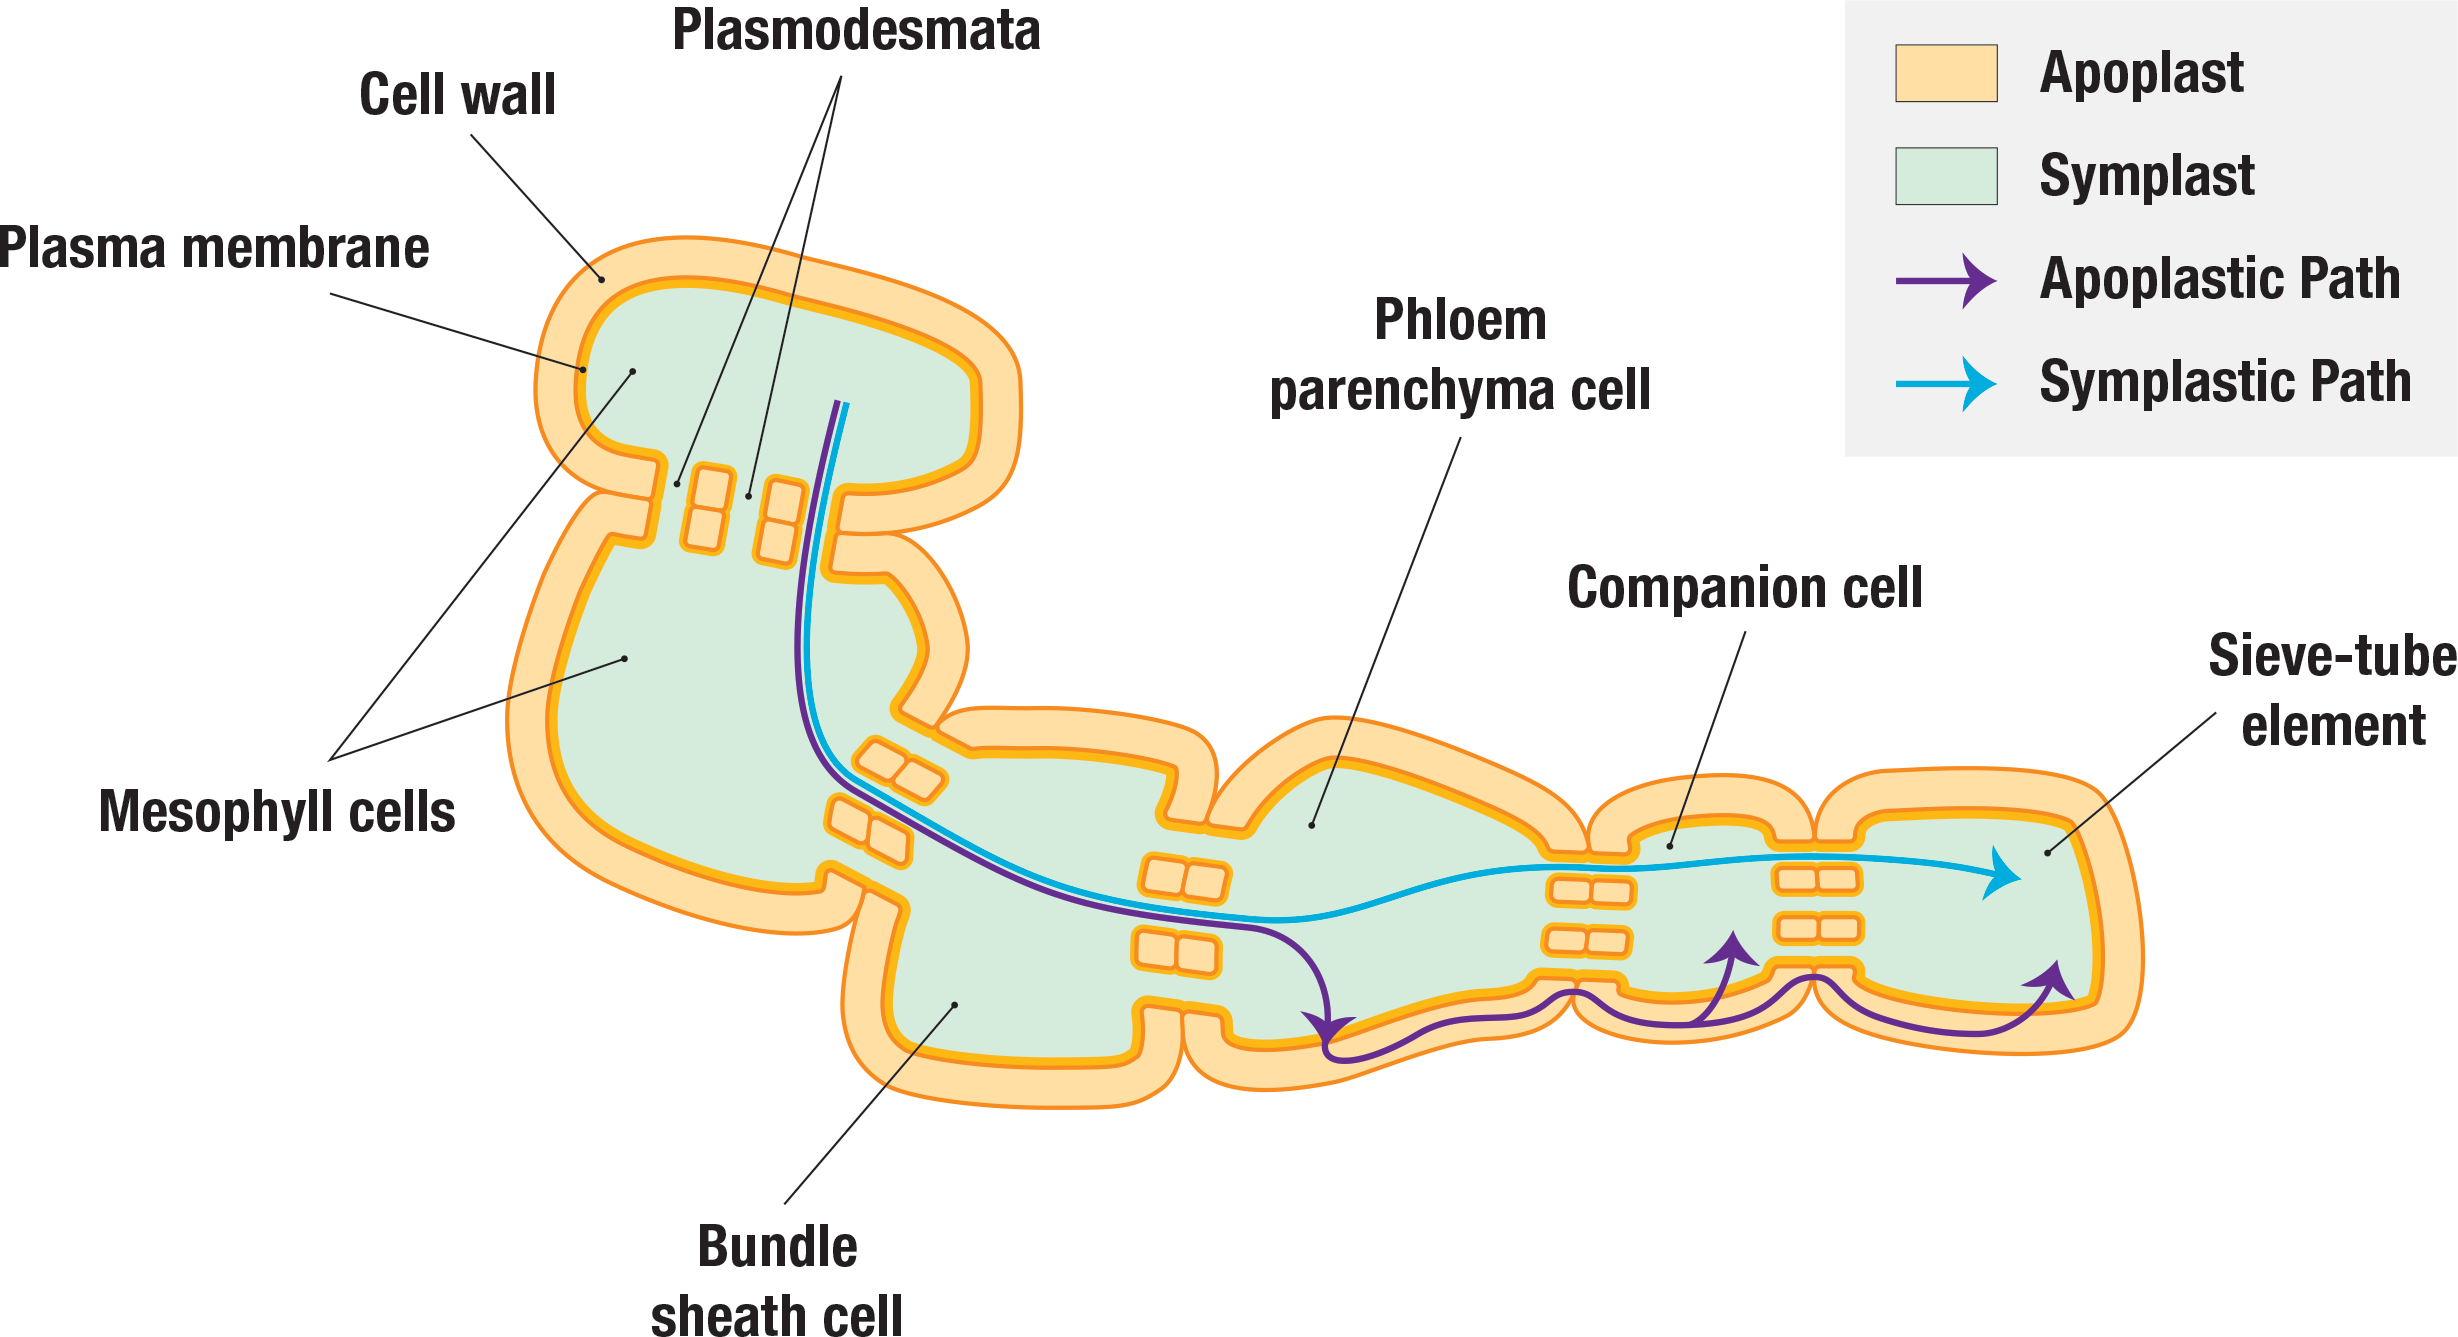 The mesophyll cells, bundle sheath cell, phloem parenchyma, companion cell, and sieve-tube element are interconnected with plasmodesmata.